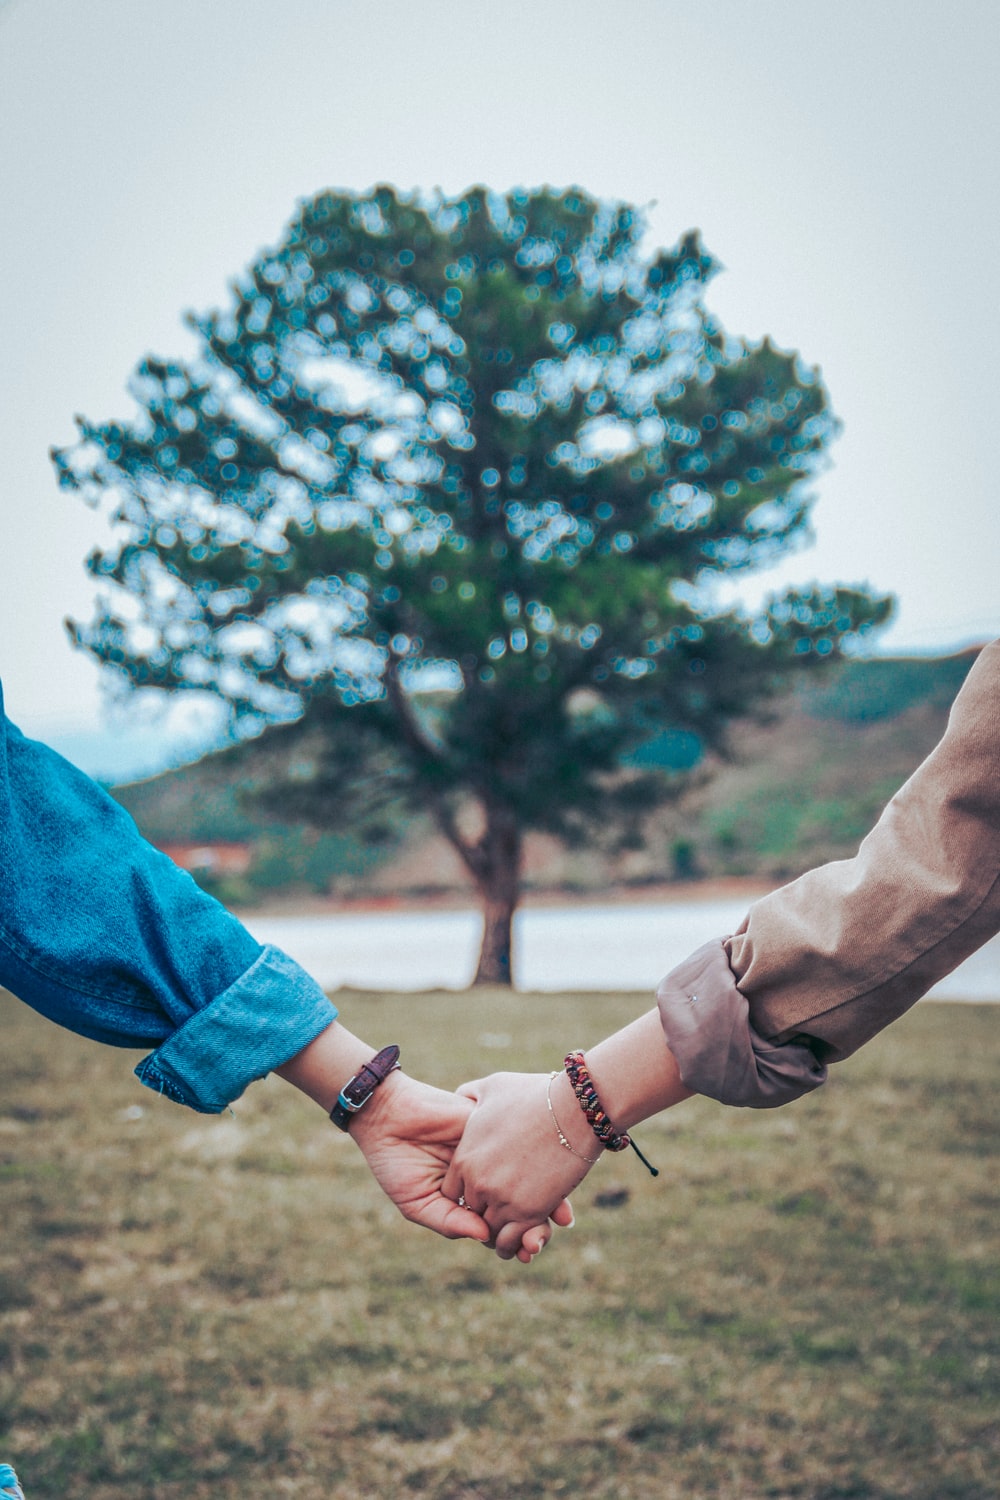 Couple Holding Hands Picture. Download Free Image